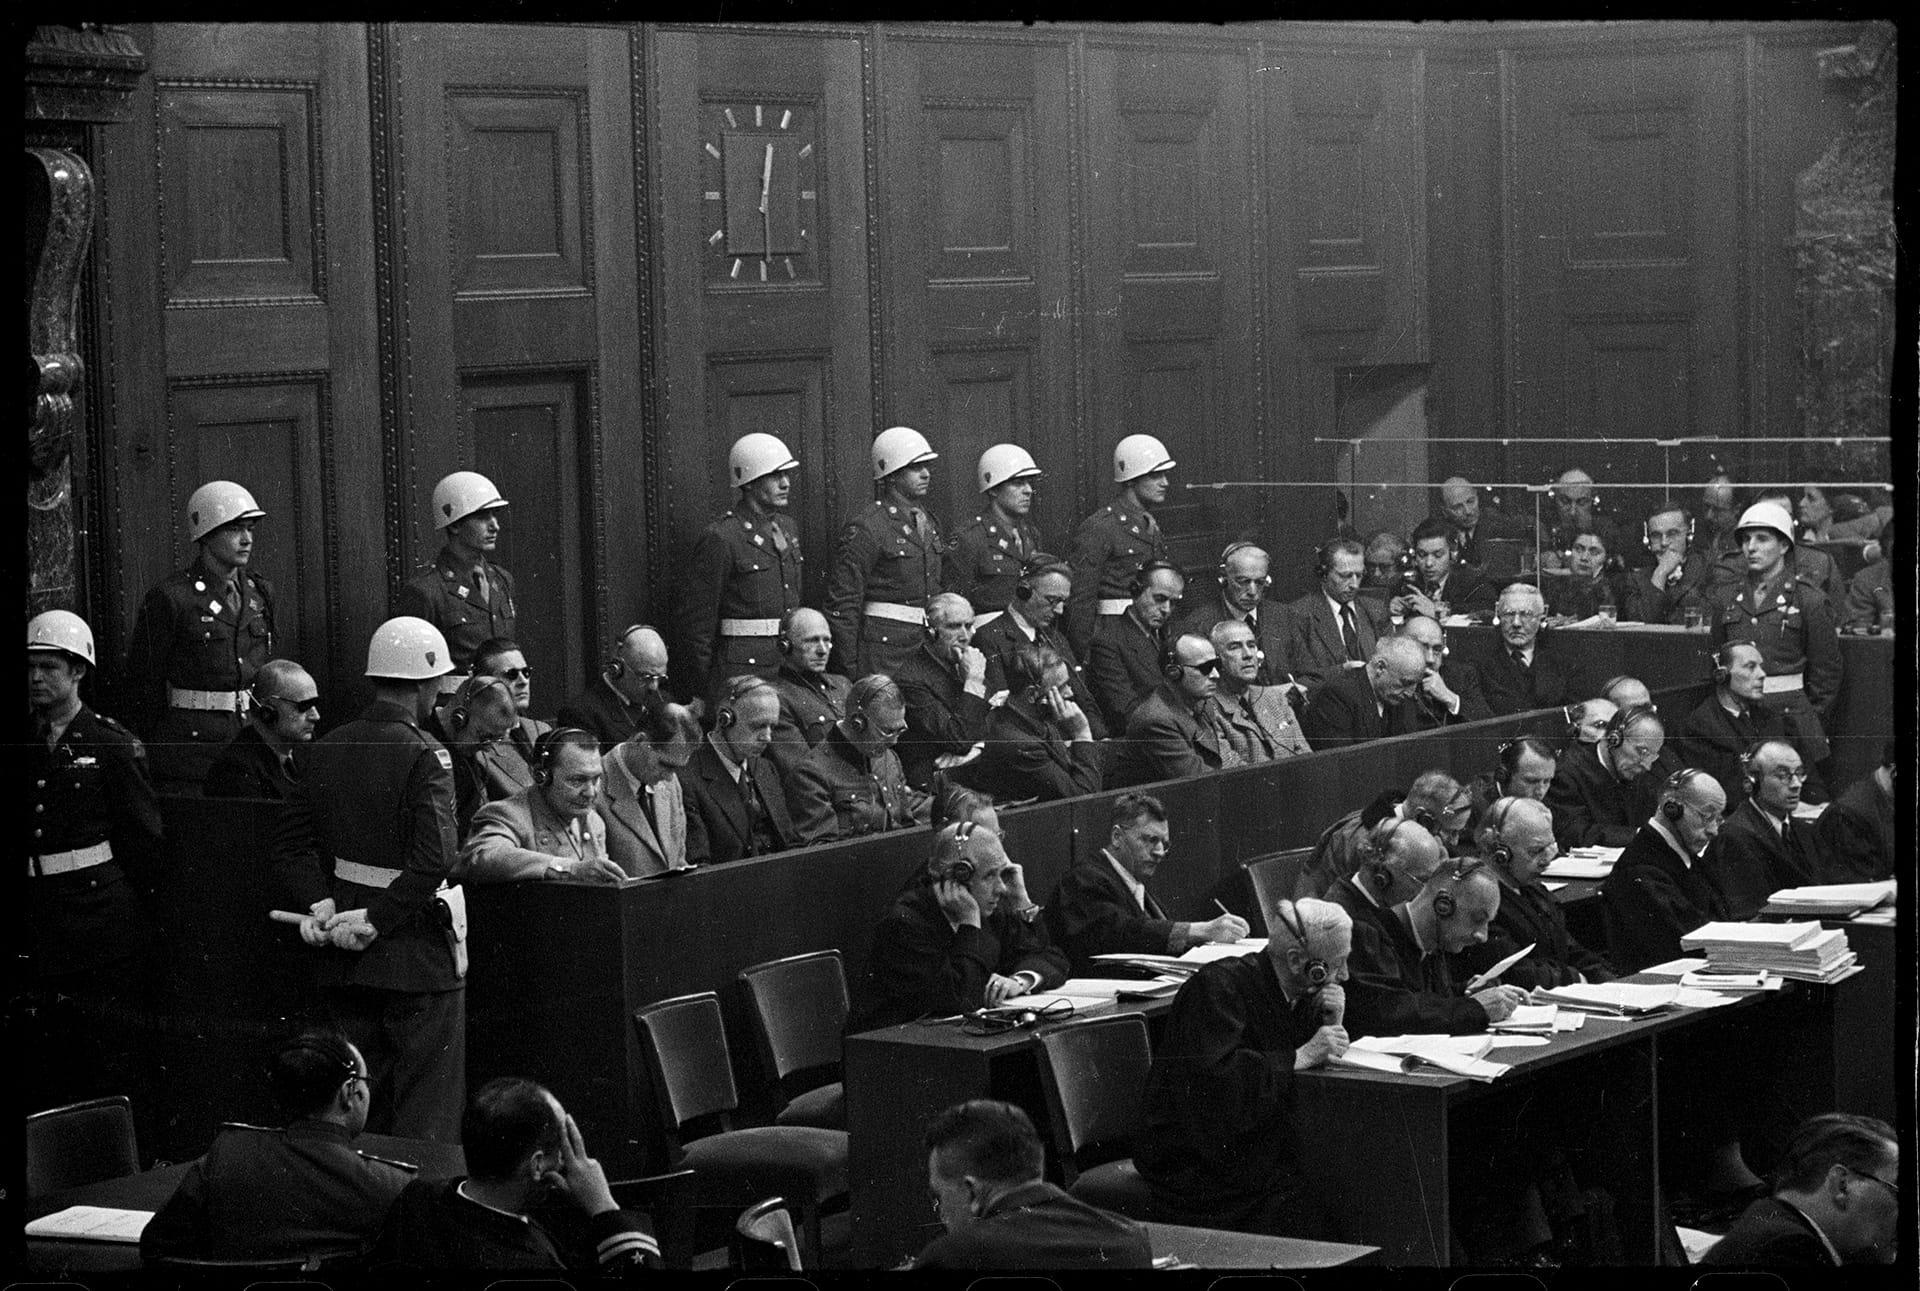 Nuremberg trial - the most famous and mysterious trial of the 20th century